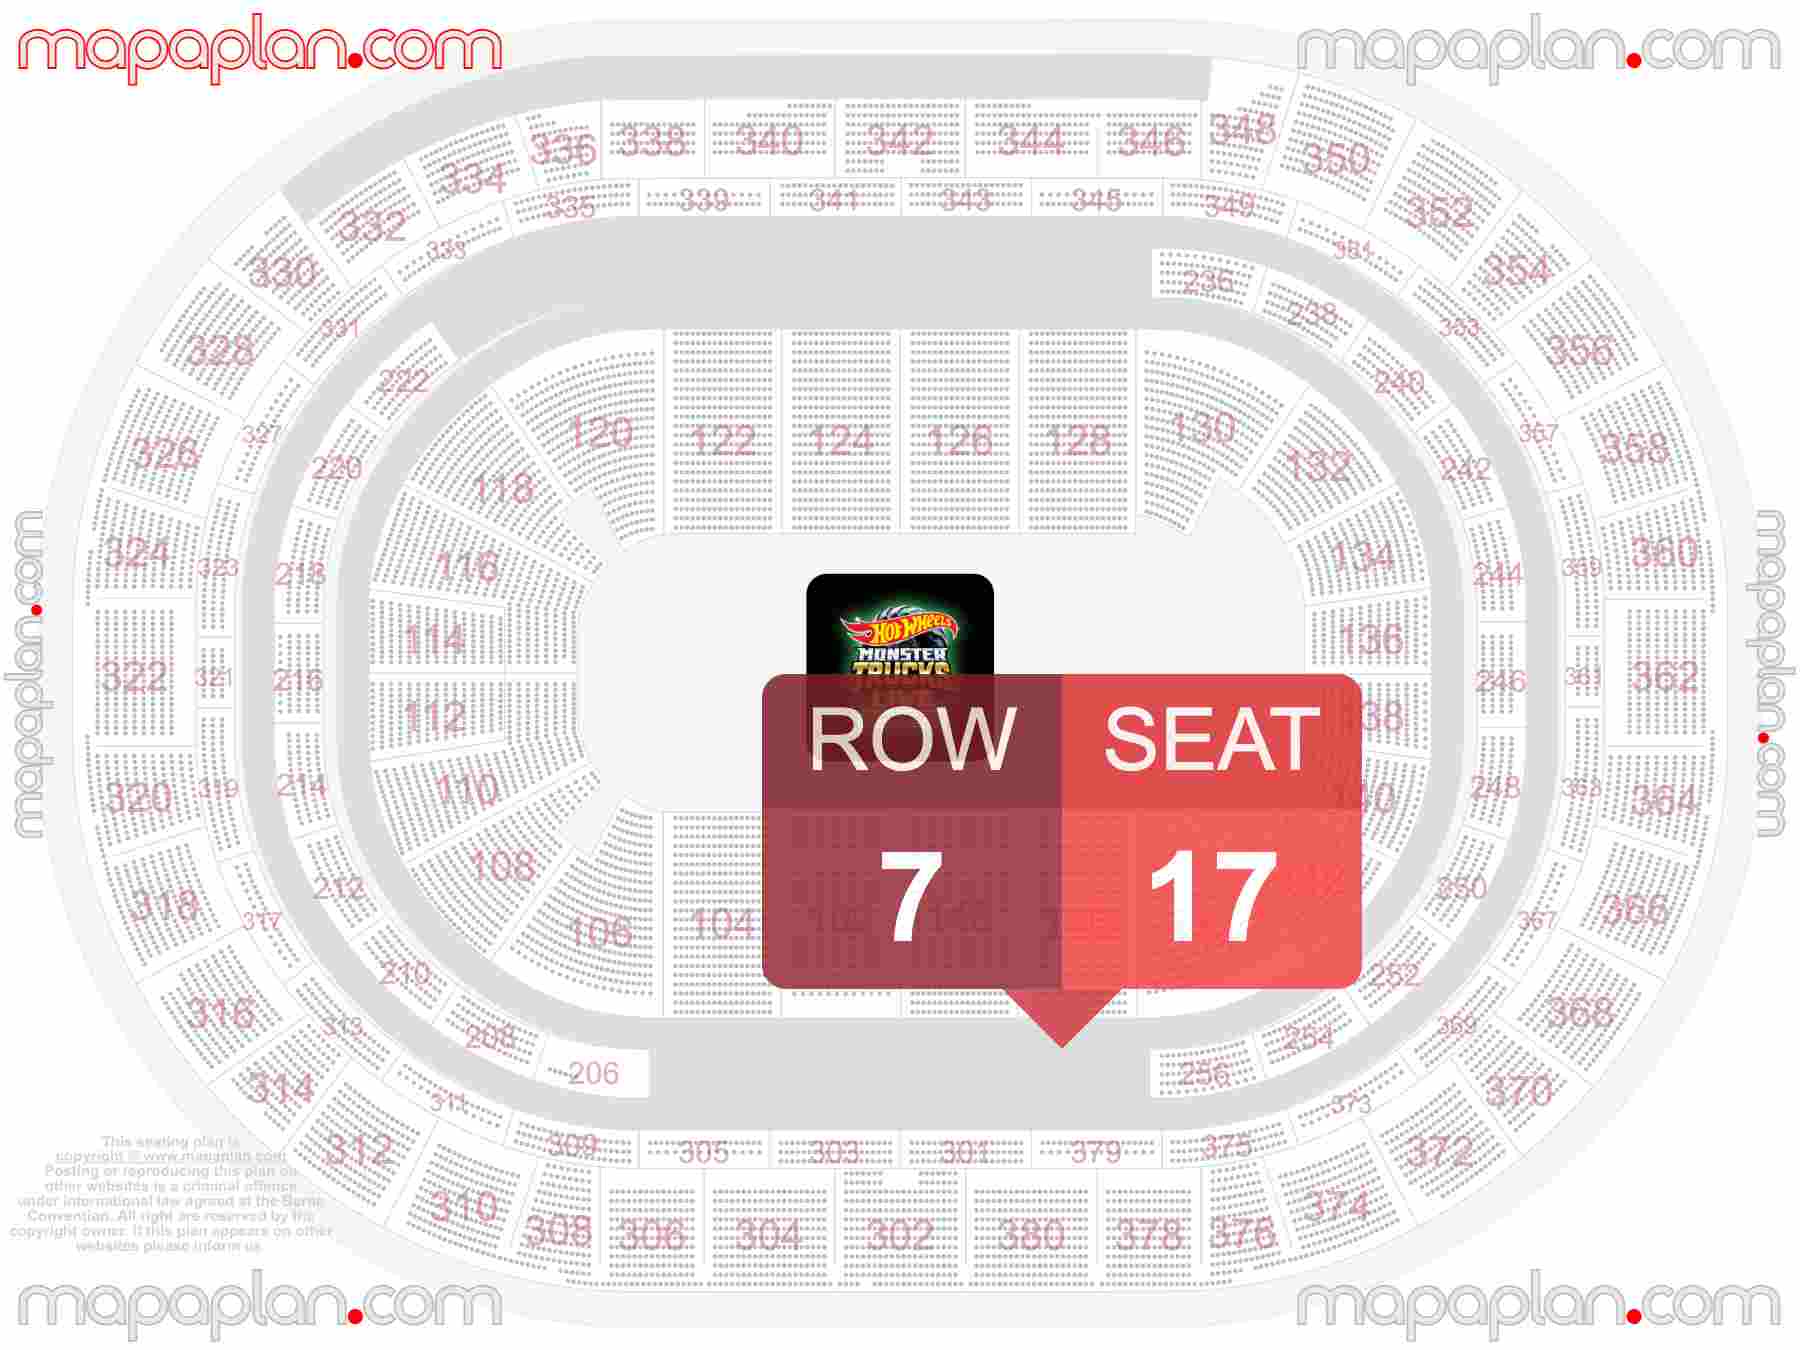 Denver Ball Arena seating chart Monster trucks precise seat finder - Explore seating chart with exact section, seat and row numbers